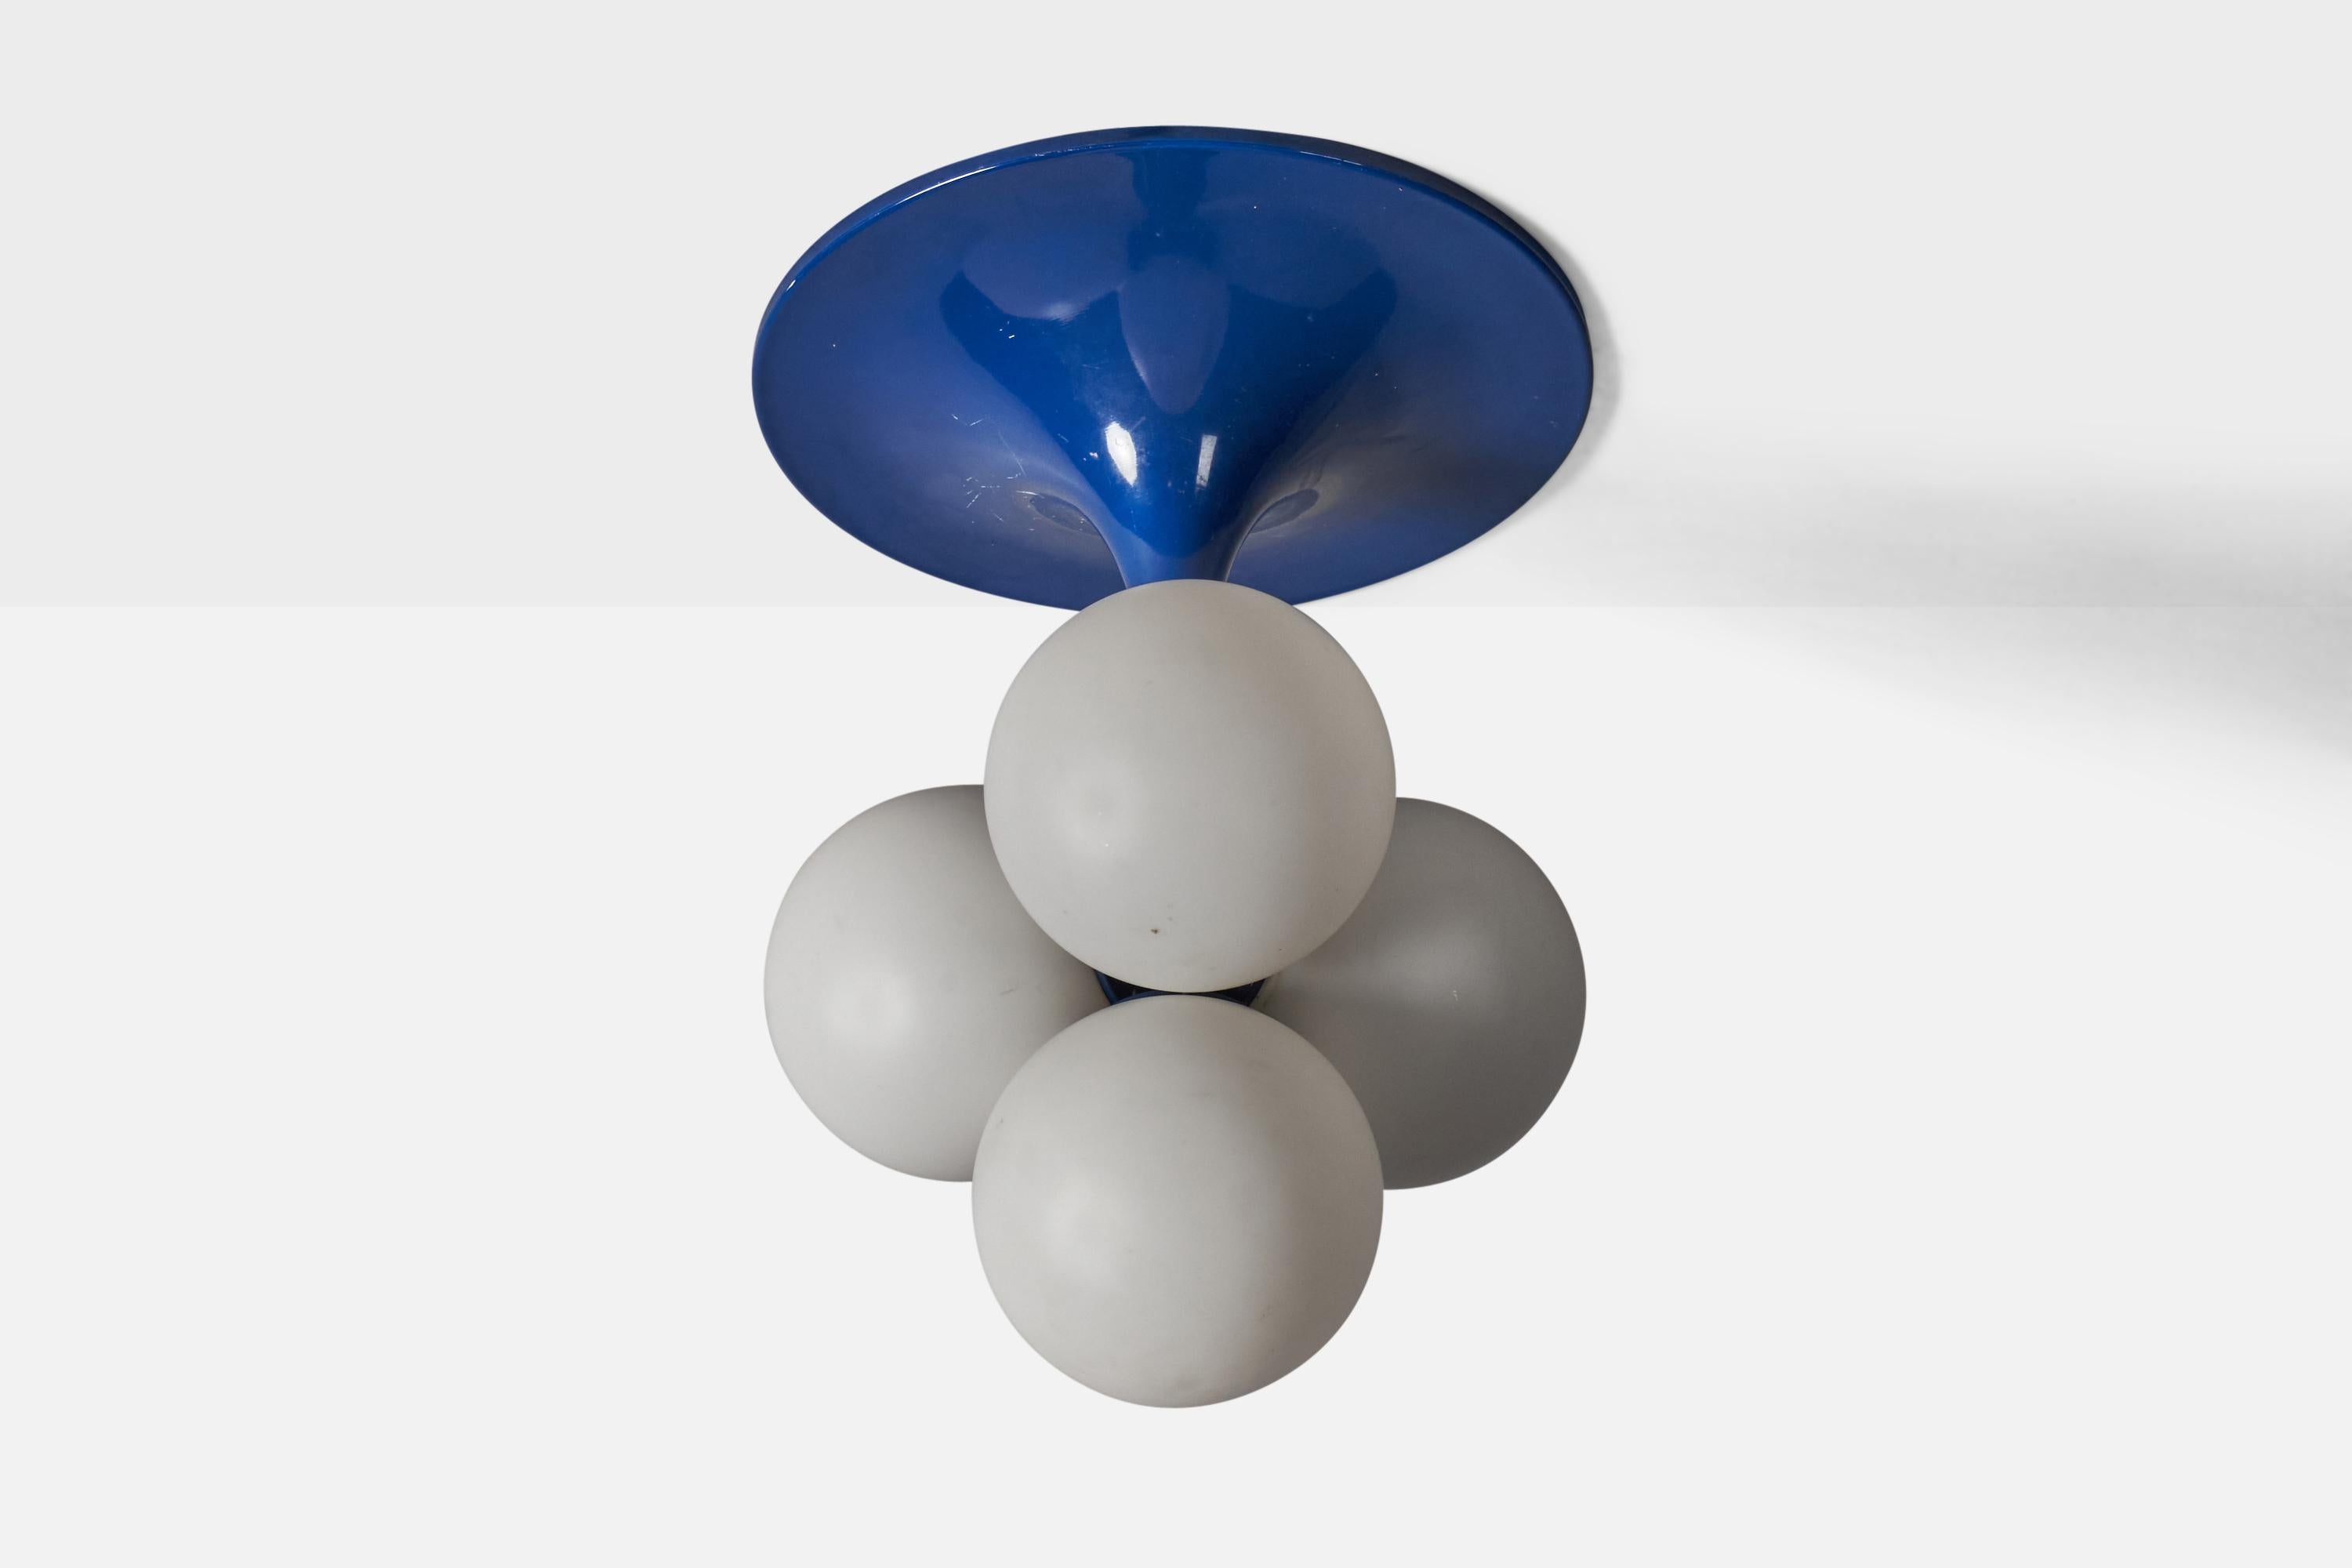 A blue-lacquered metal and frosted glass chandelier designed and produced in Italy, c. 1960s.

Overall Dimensions (inches): 21.25